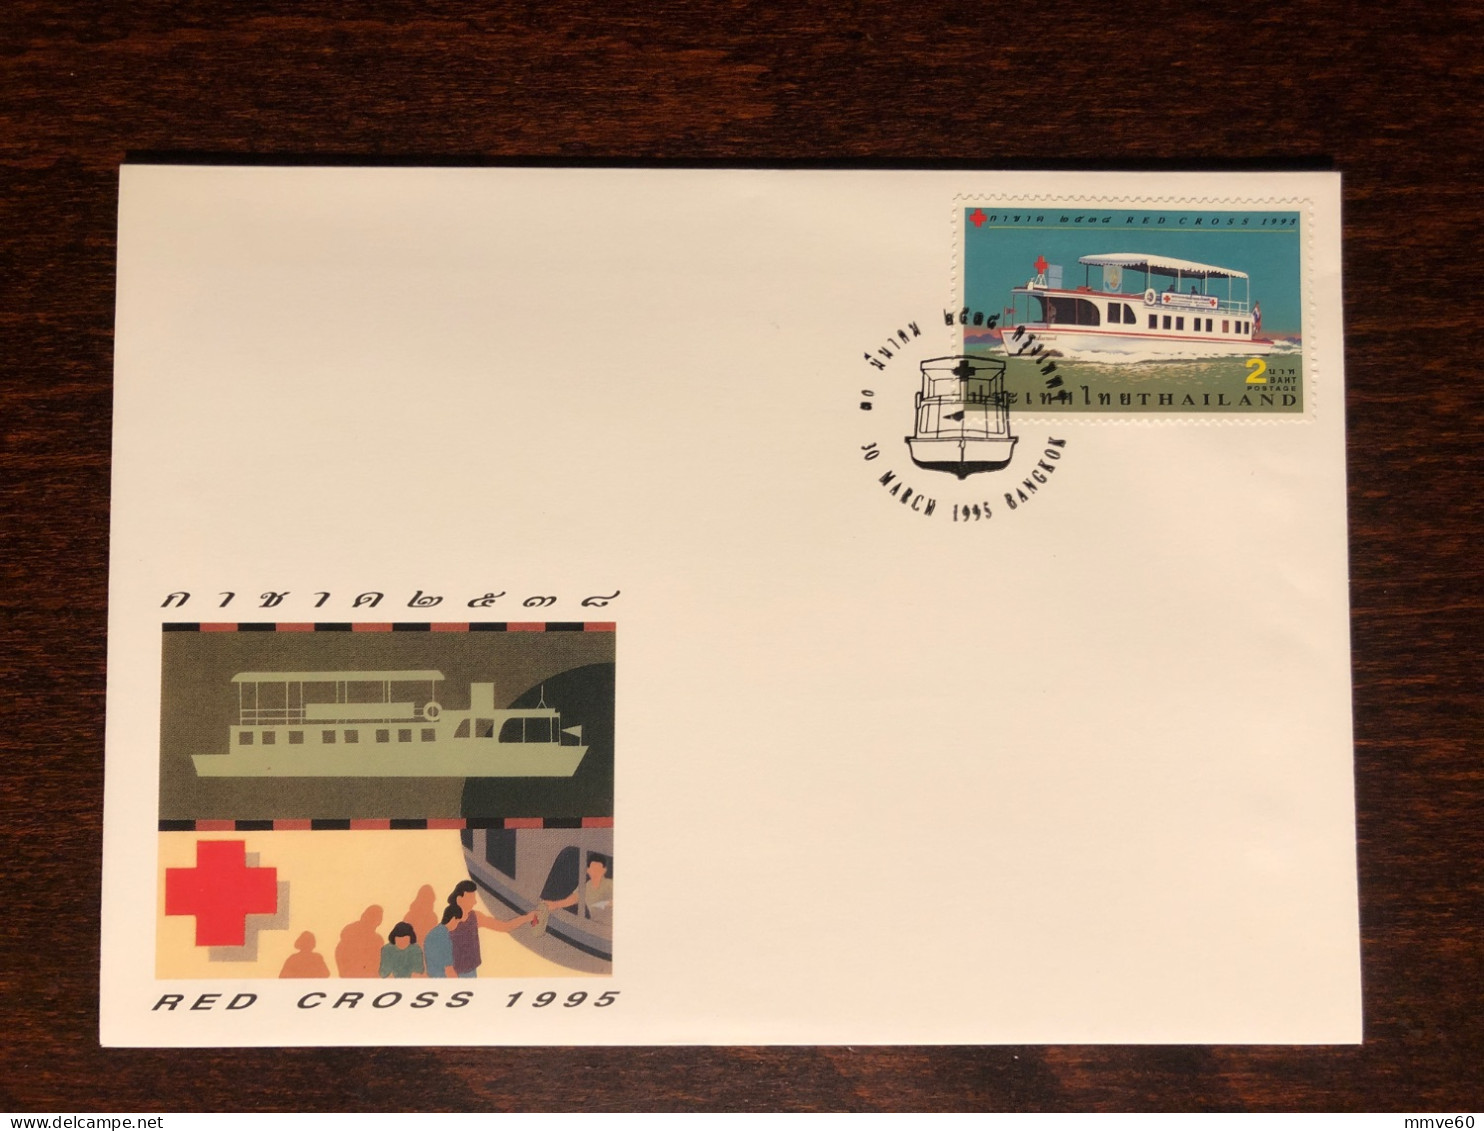 THAILAND FDC COVER 1995 YEAR RED CROSS HEALTH MEDICINE STAMPS - Thailand